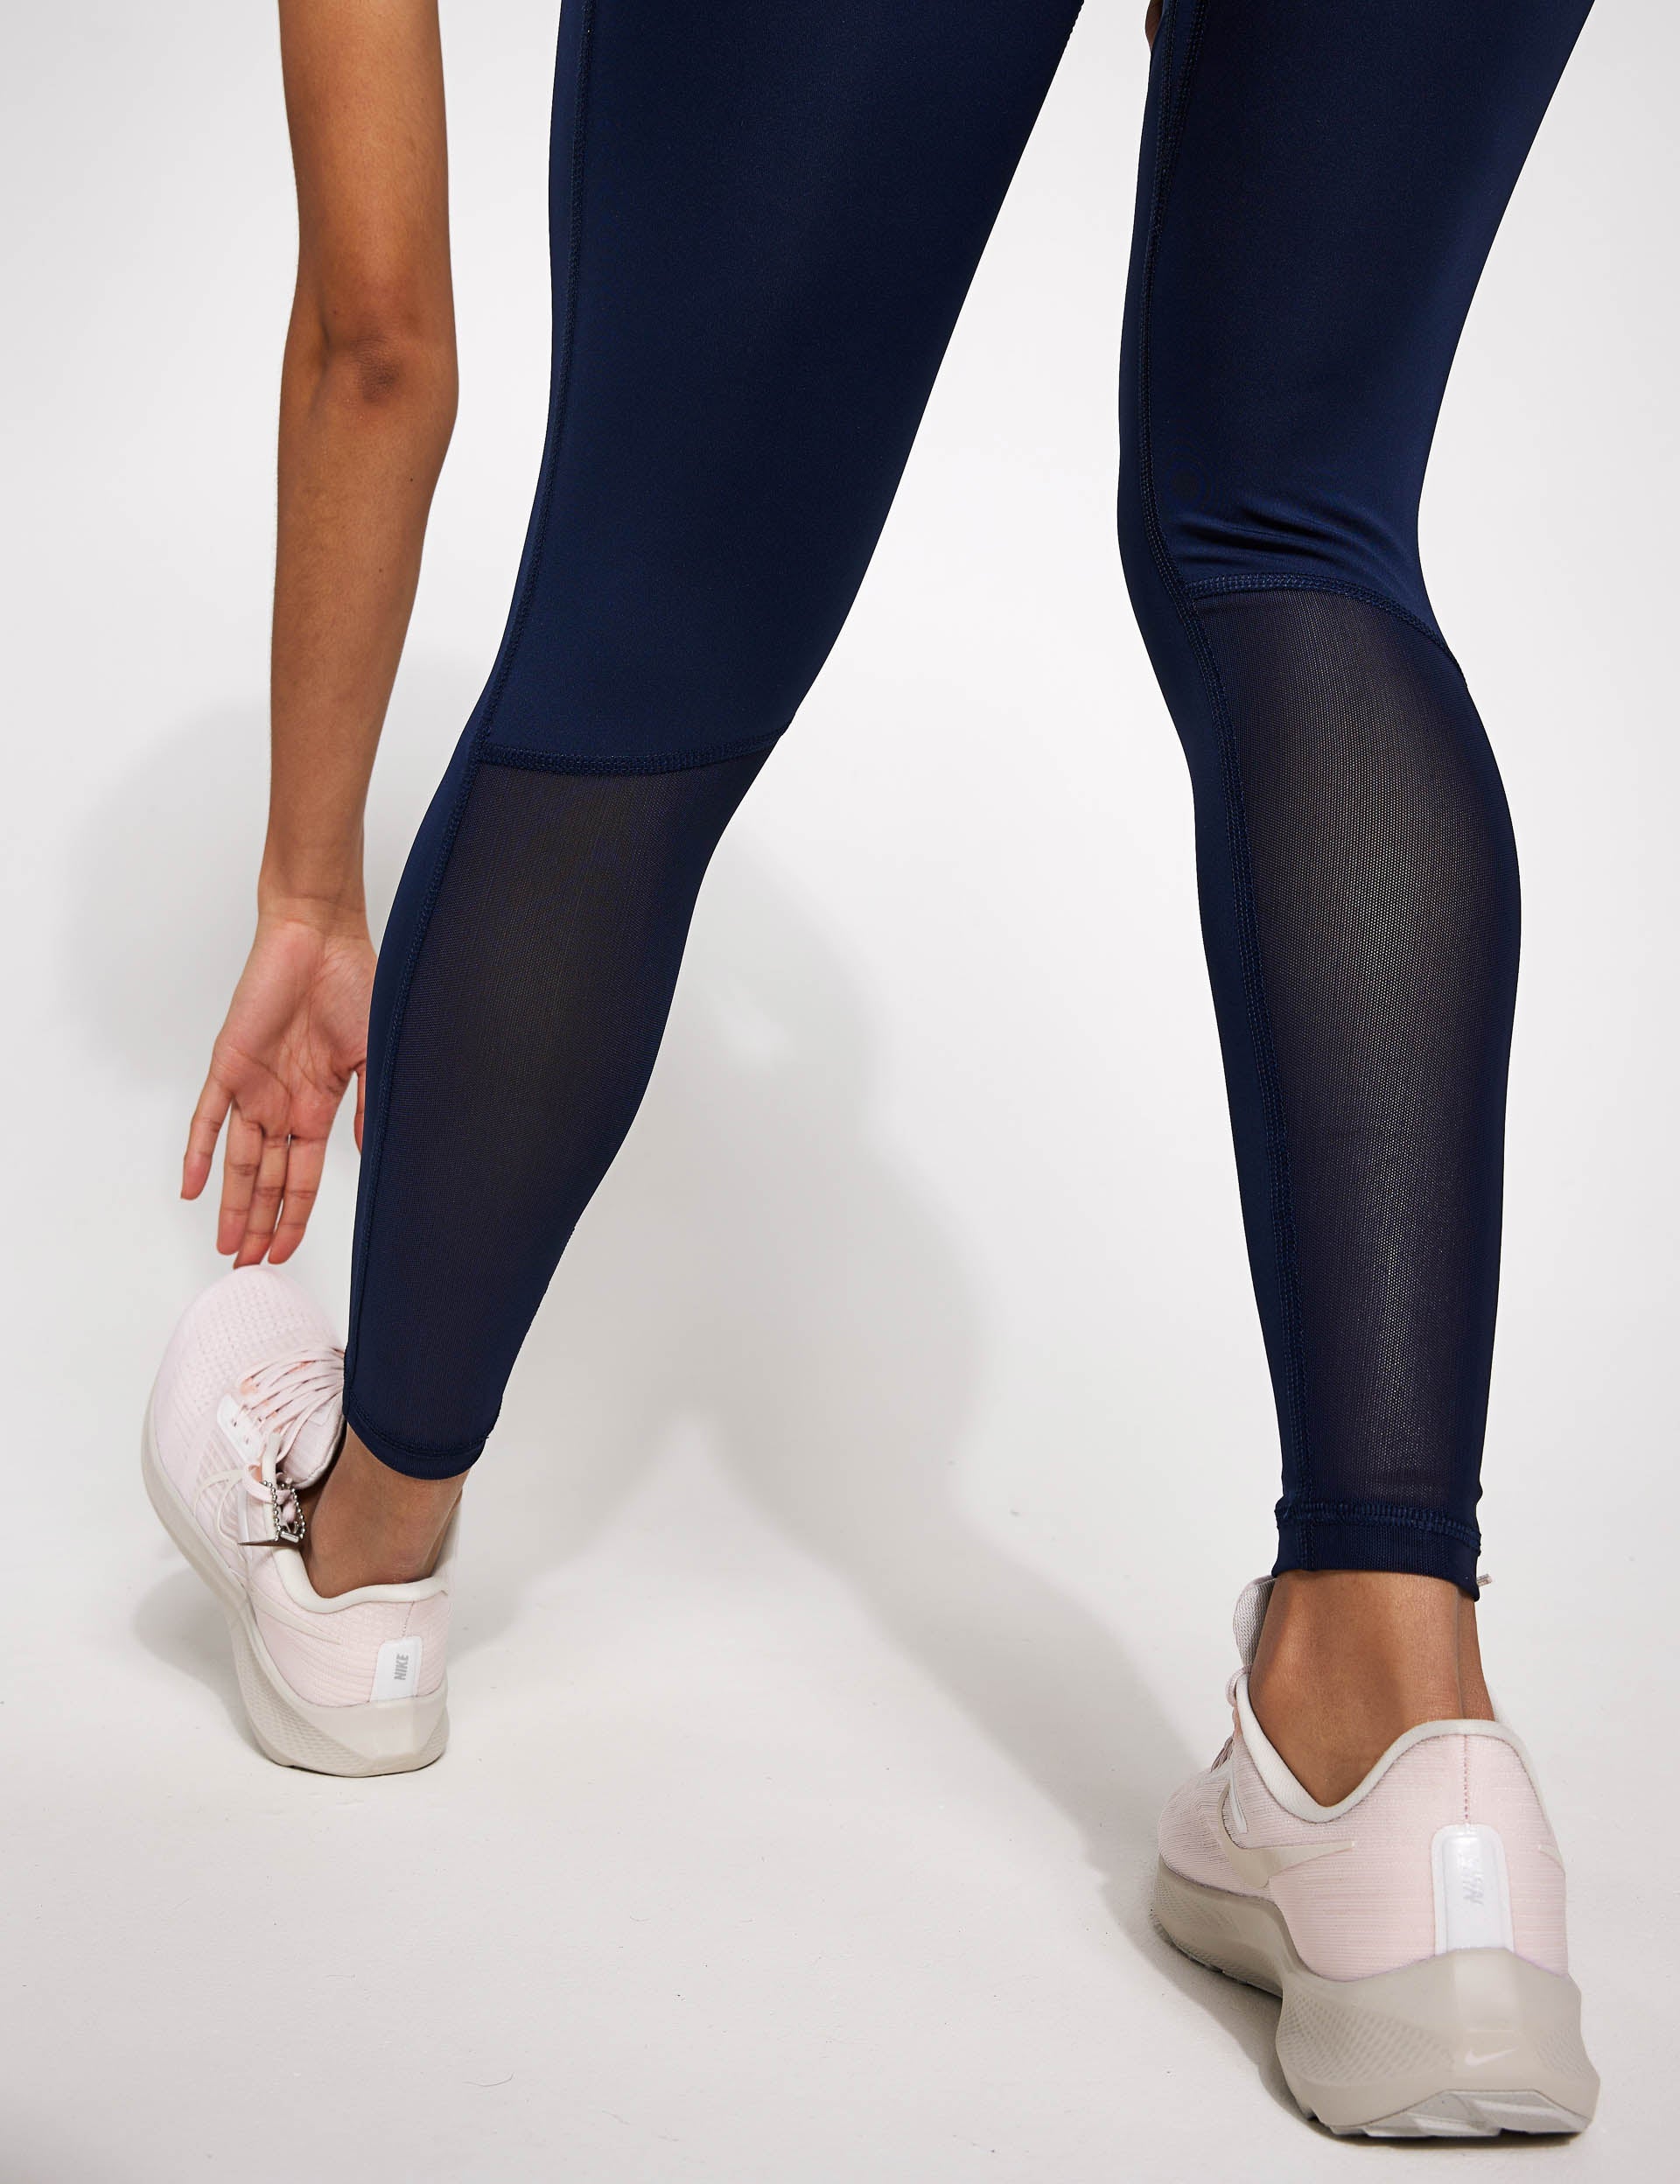 Buy Nike Blue Pro 365 Leggings from Next Luxembourg